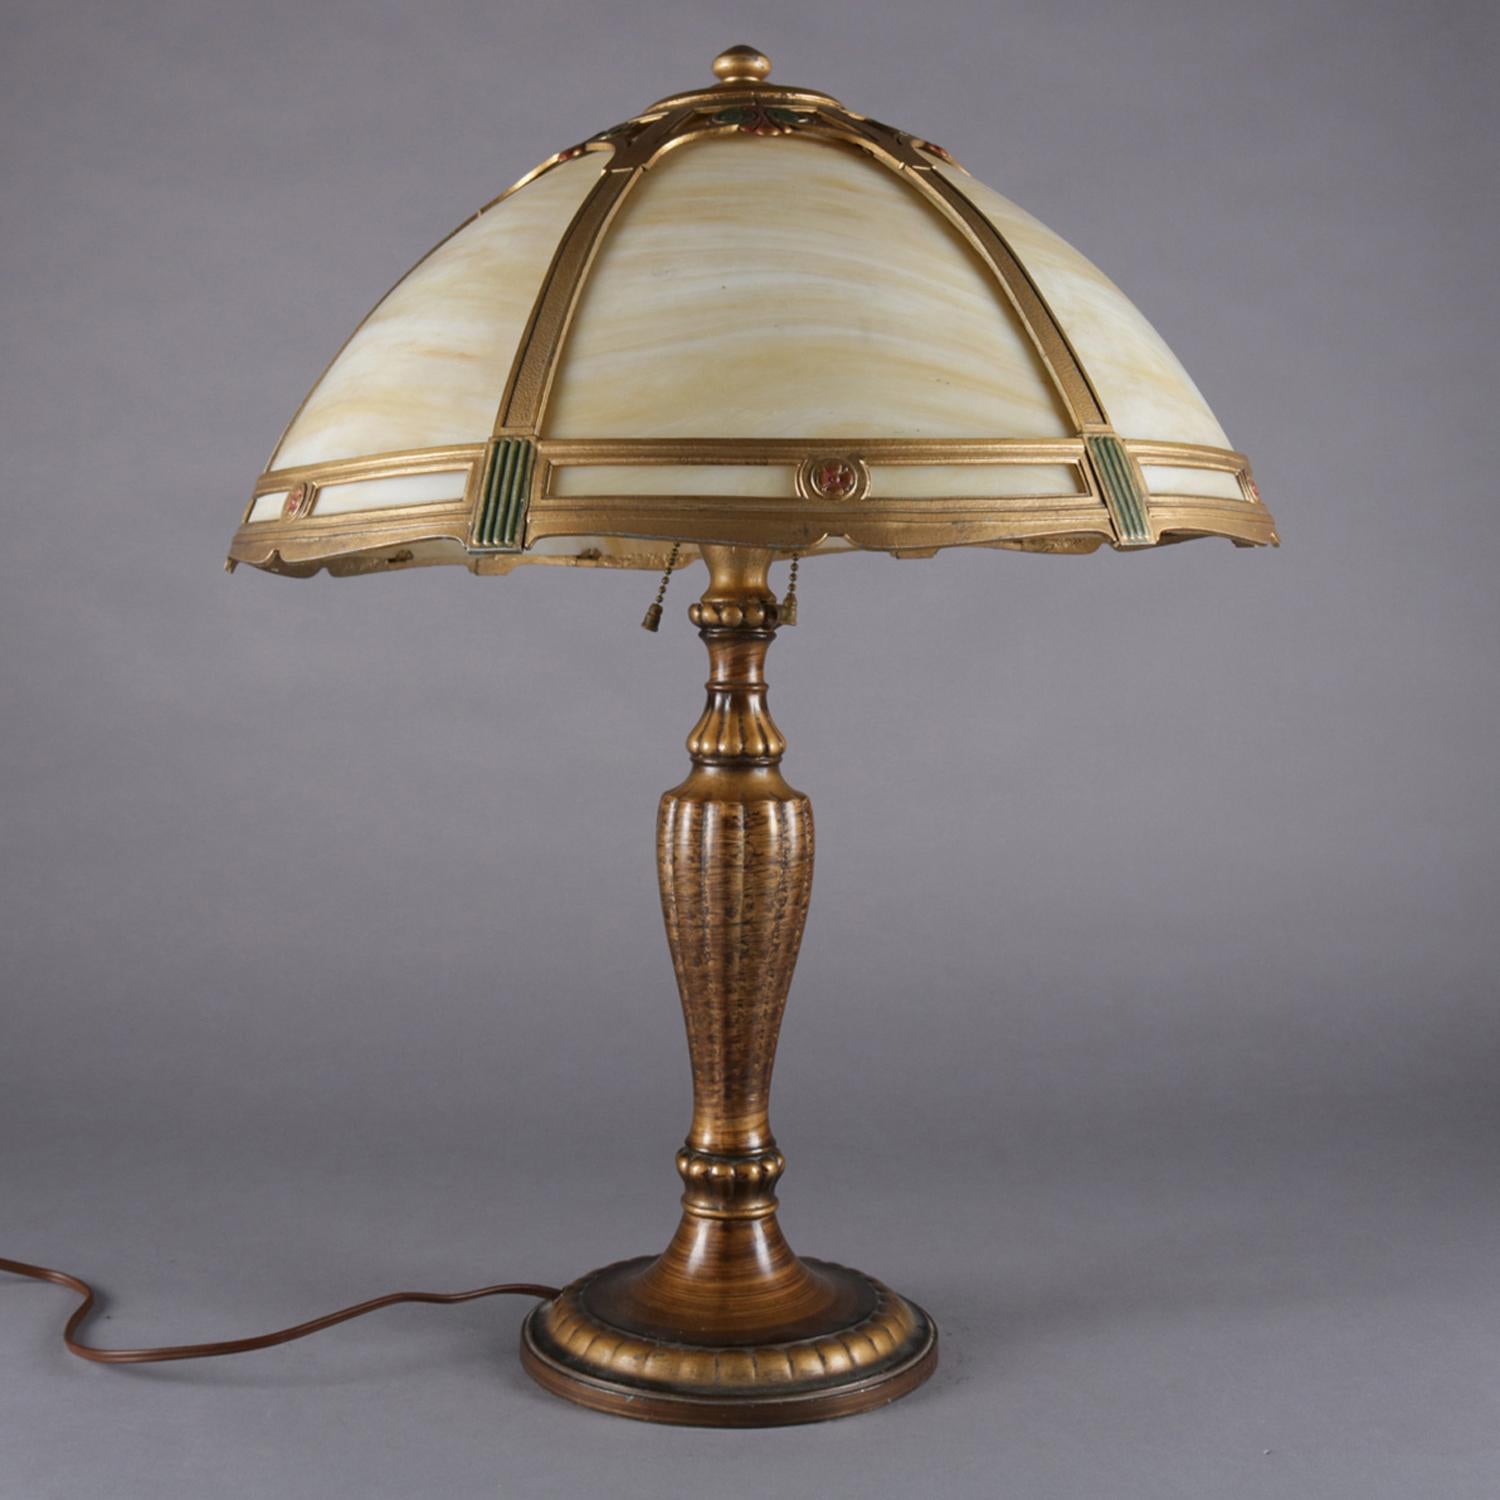 Arts & Crafts table lamp by Jefferson features cast and bronzed metal base with two independently controlled pull chain light sockets, shade with polychromed frame having stylized floral and scroll decoration and housing six bent slag glass panels,